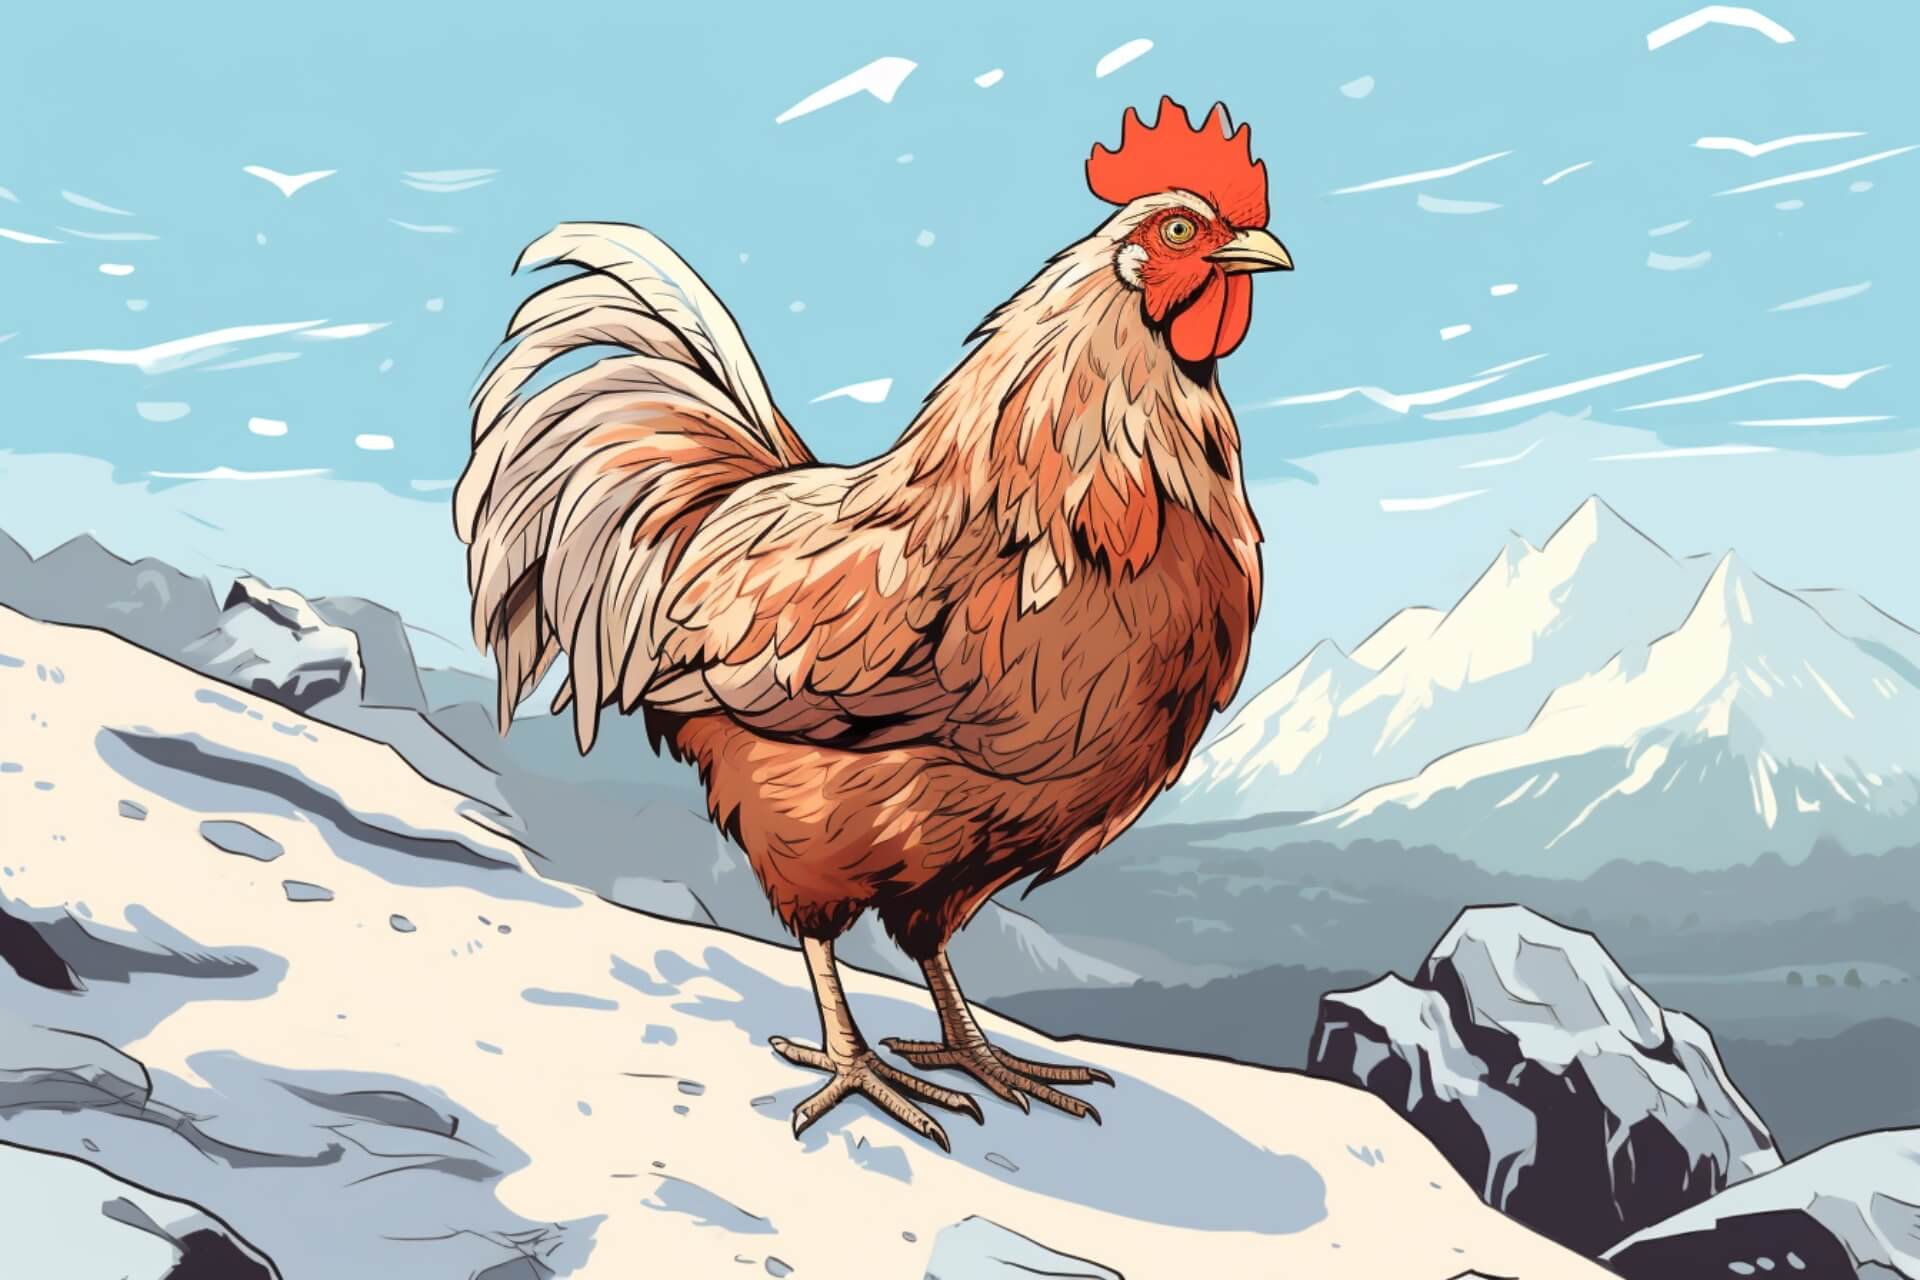 Chicken standing on the snow